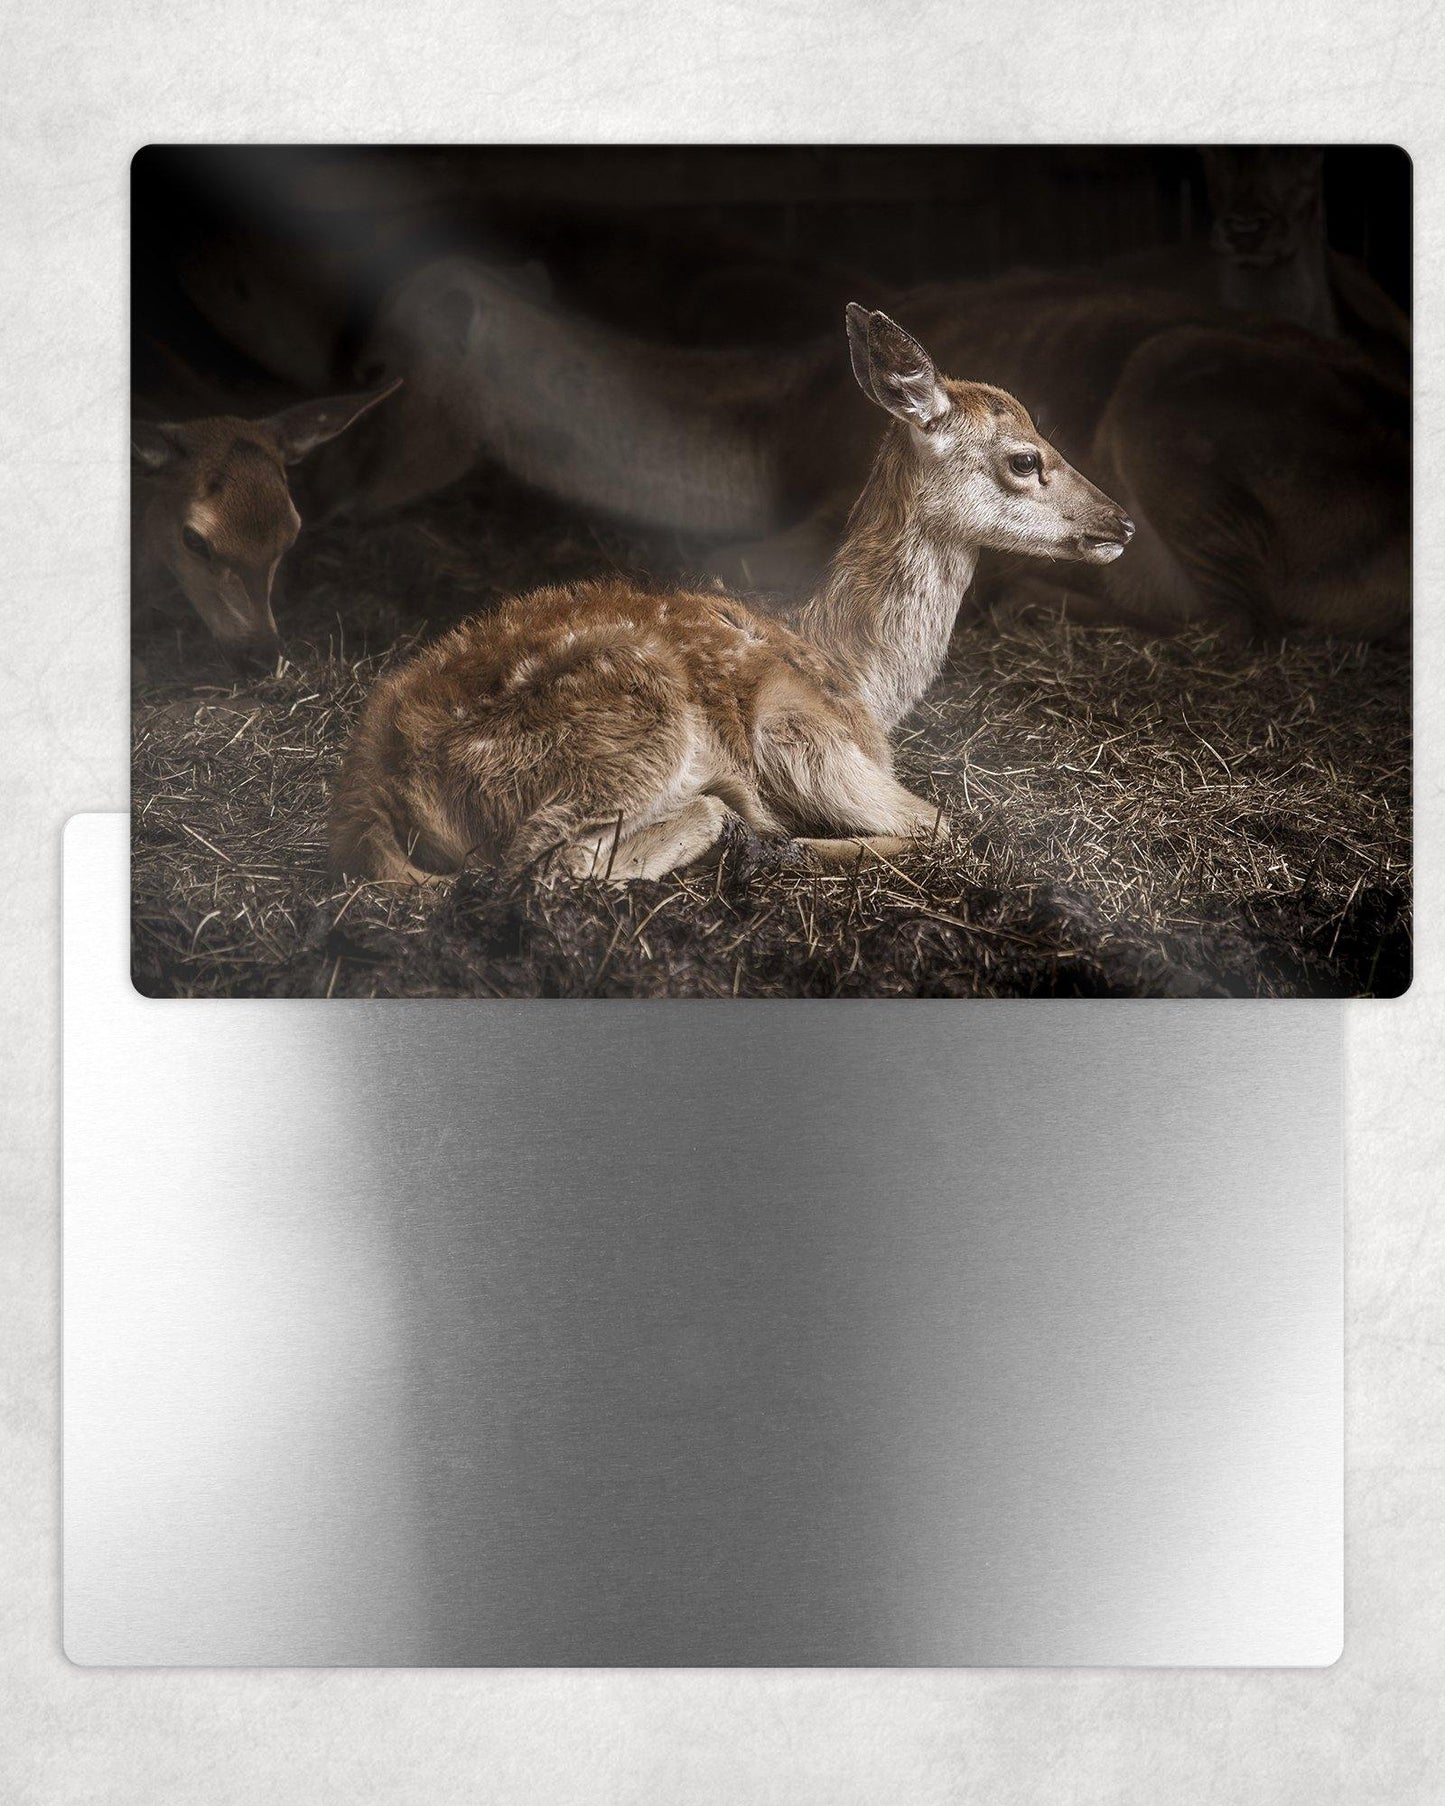 Young Fawn Metal Photo Panel - 8x12 or 12x18 - Schoppix Gifts